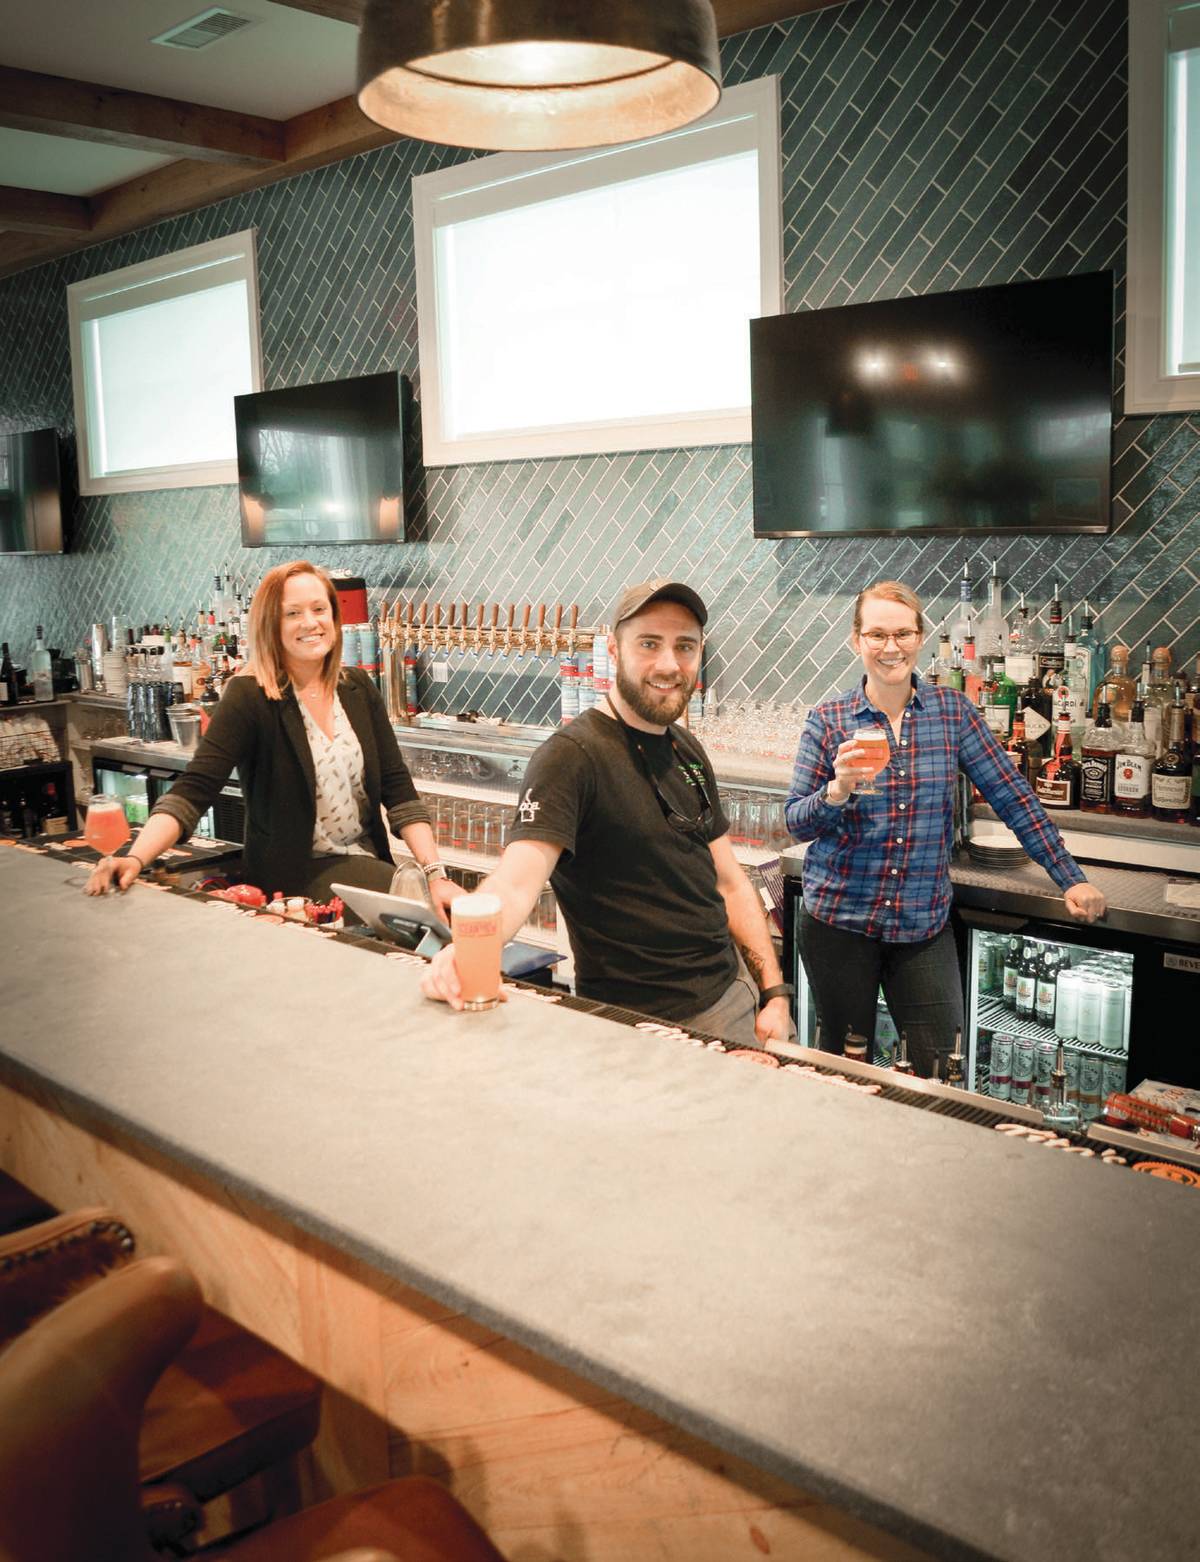 Ocean View brewing's general manager, head brewer, and beer director all behind the bar